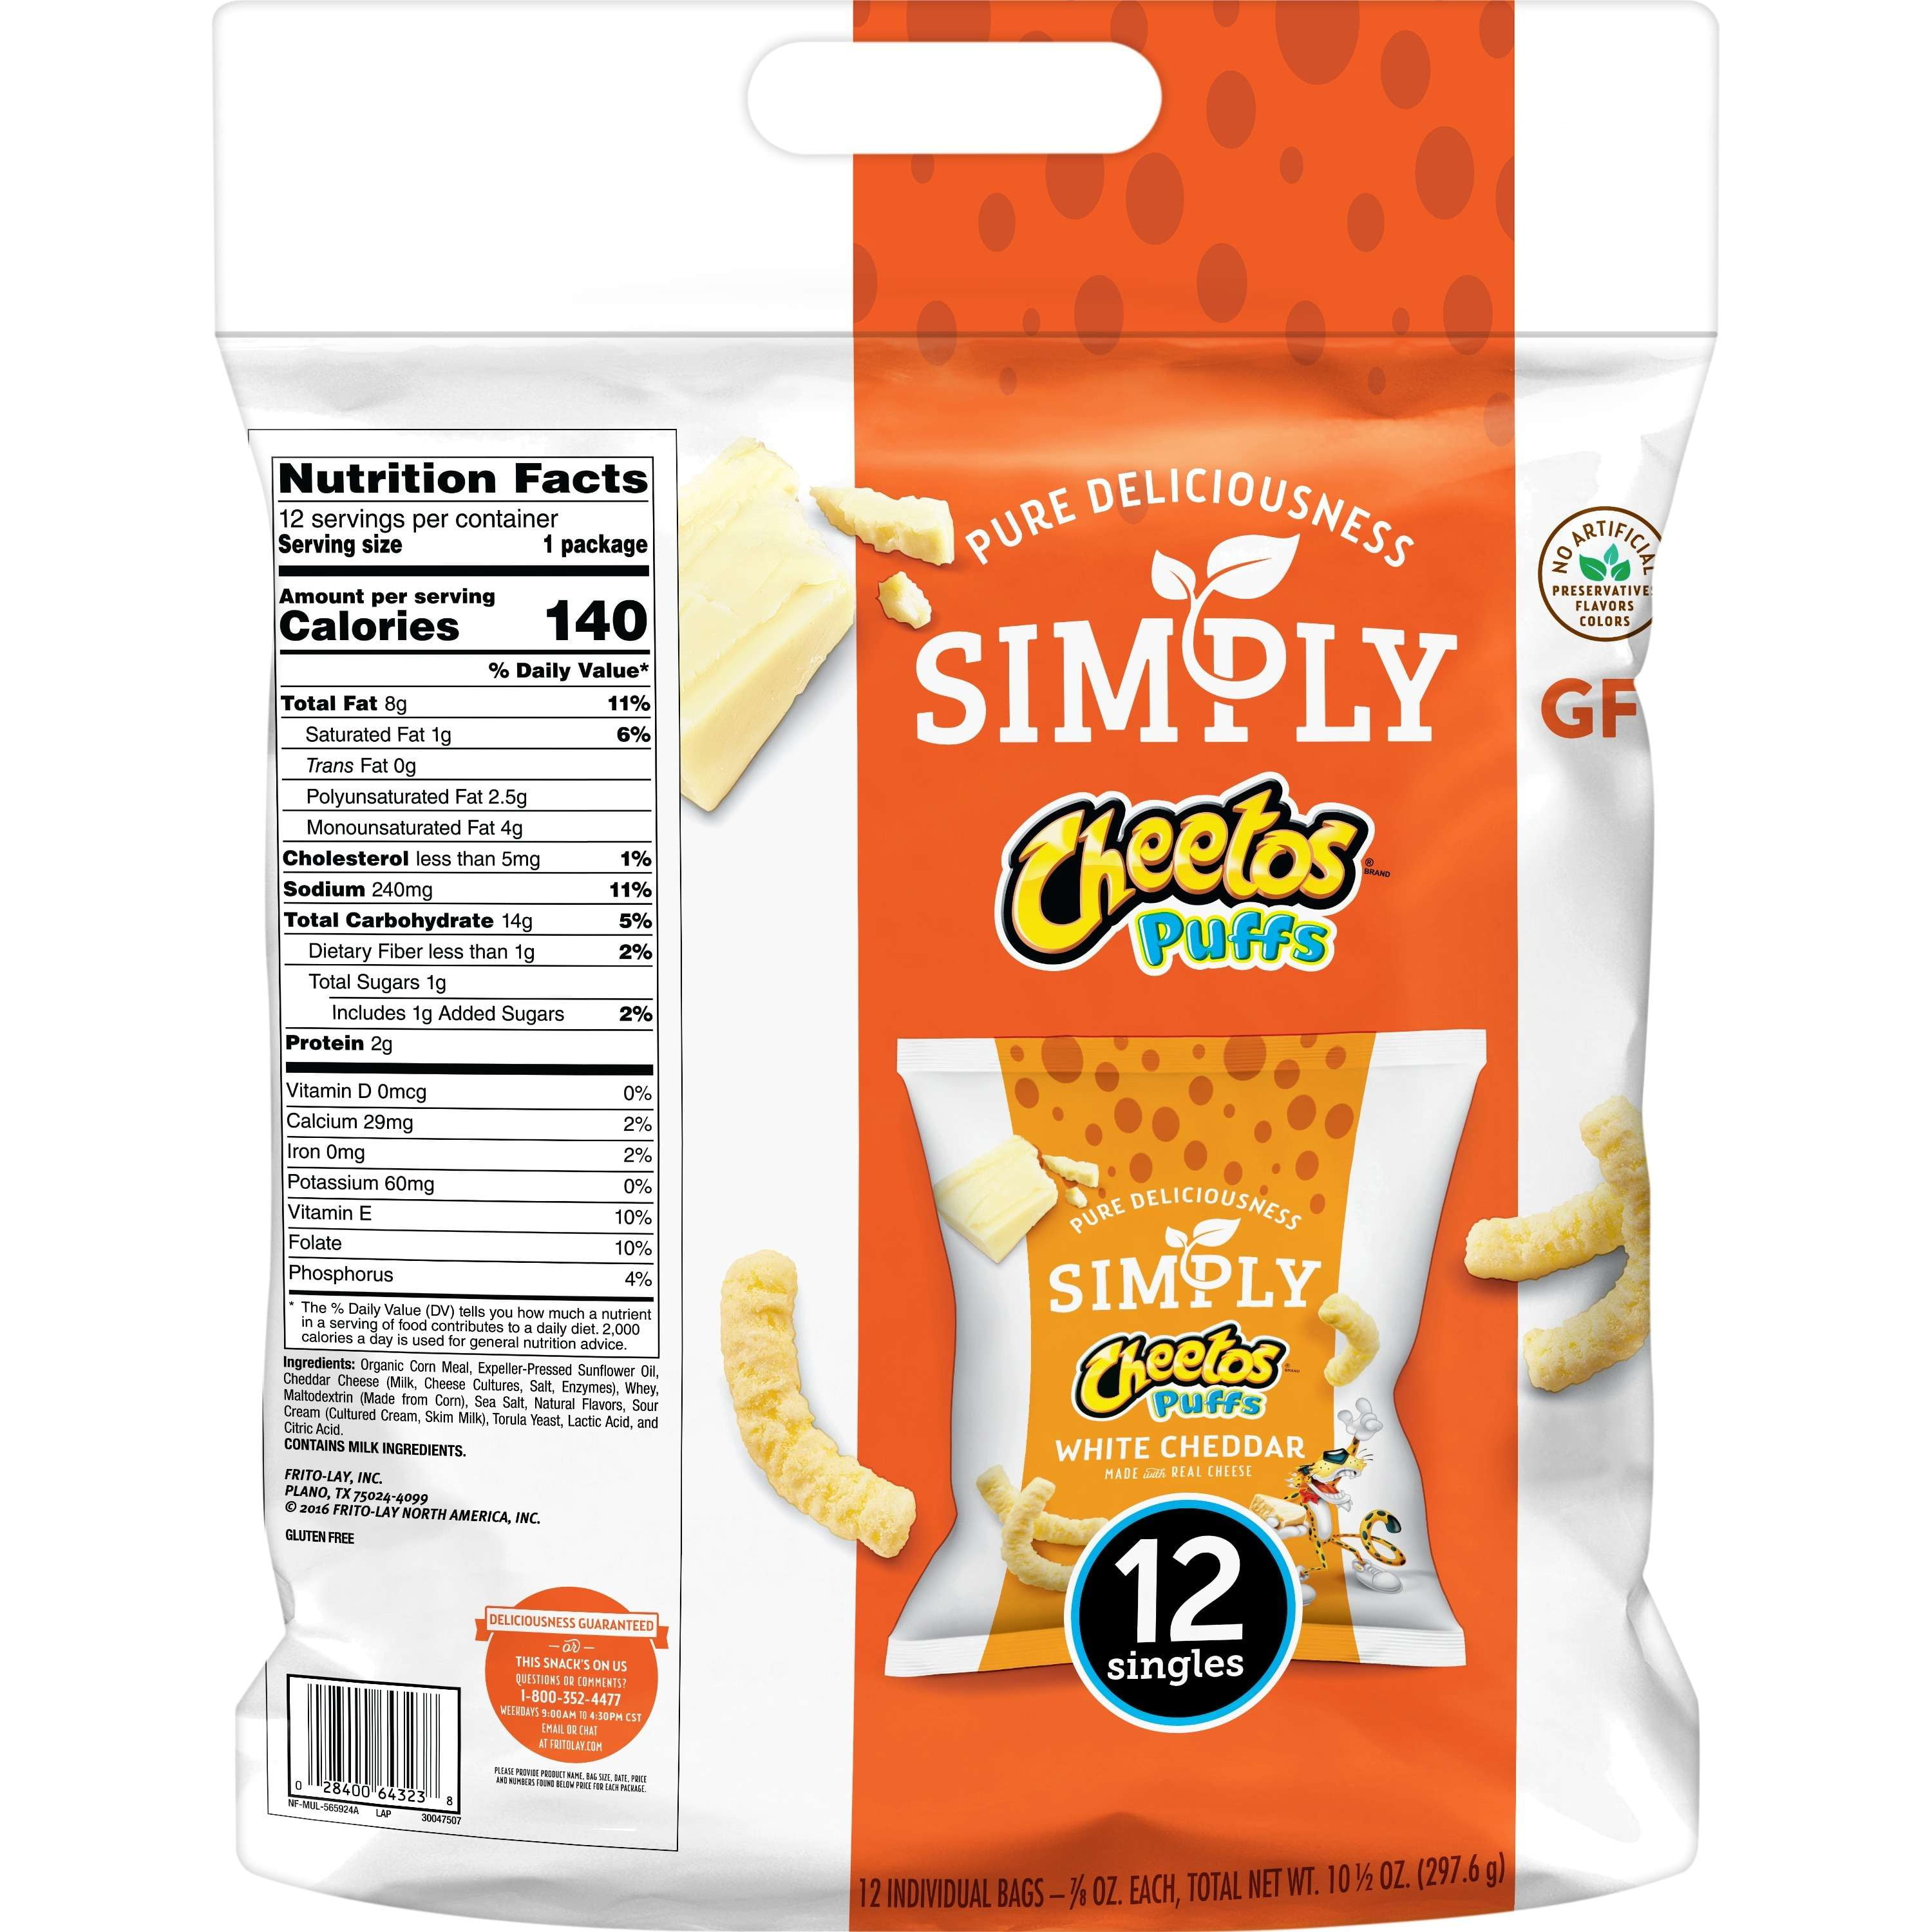 Calories in 85 grams of Simply Cheetos Puffs White Cheddar.